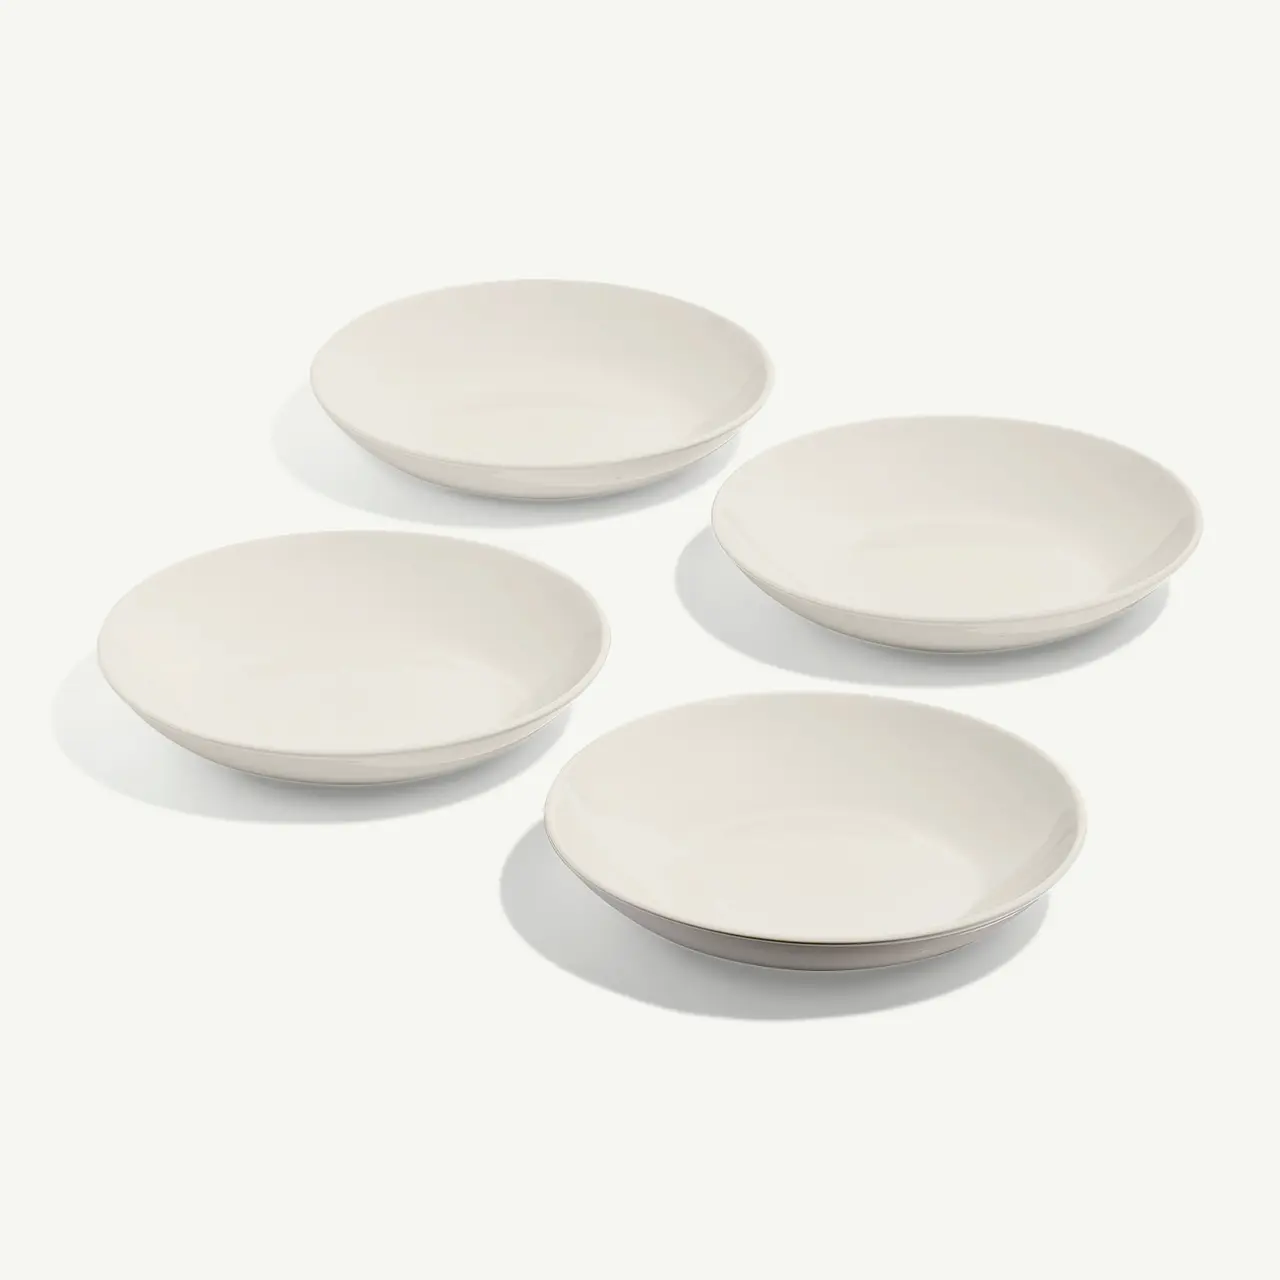 Four white, round, shallow bowls are arranged neatly on a light surface.